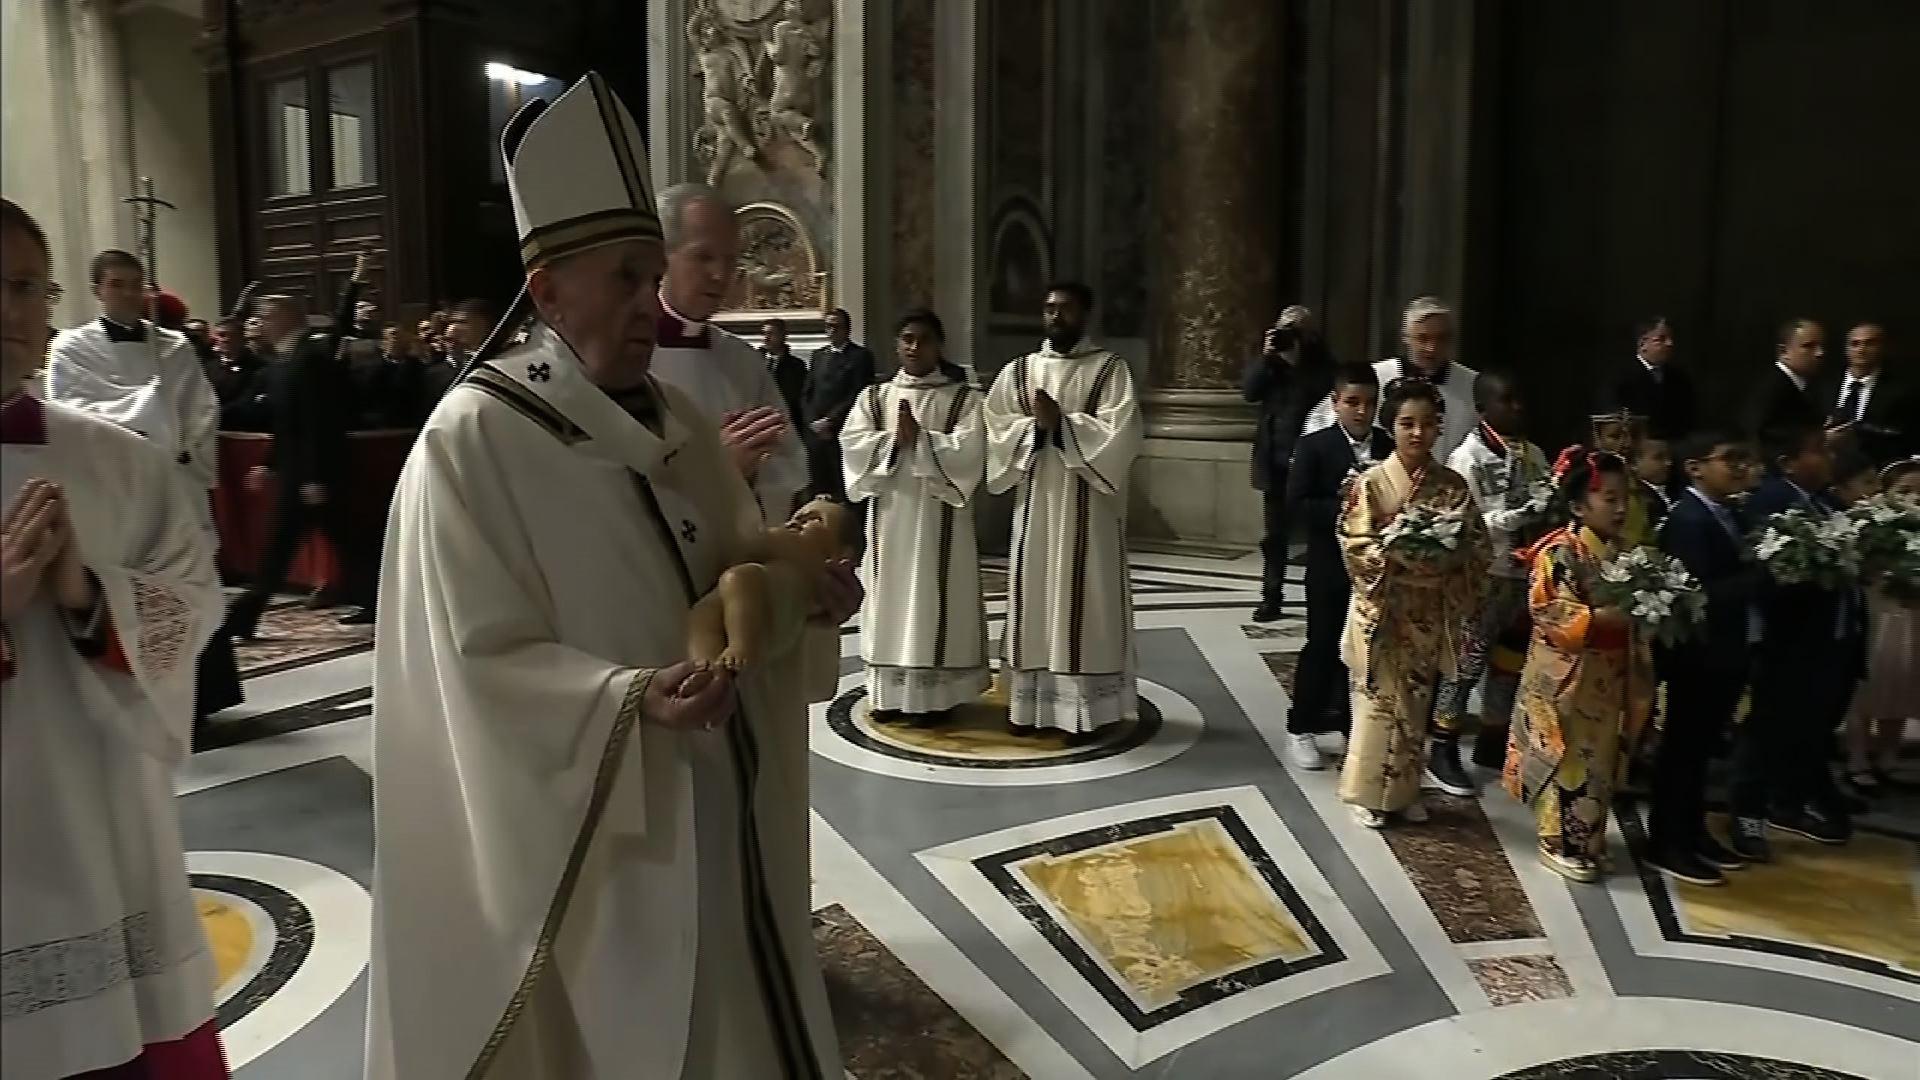 Pope celebrates Midnight Mass at the Vatican